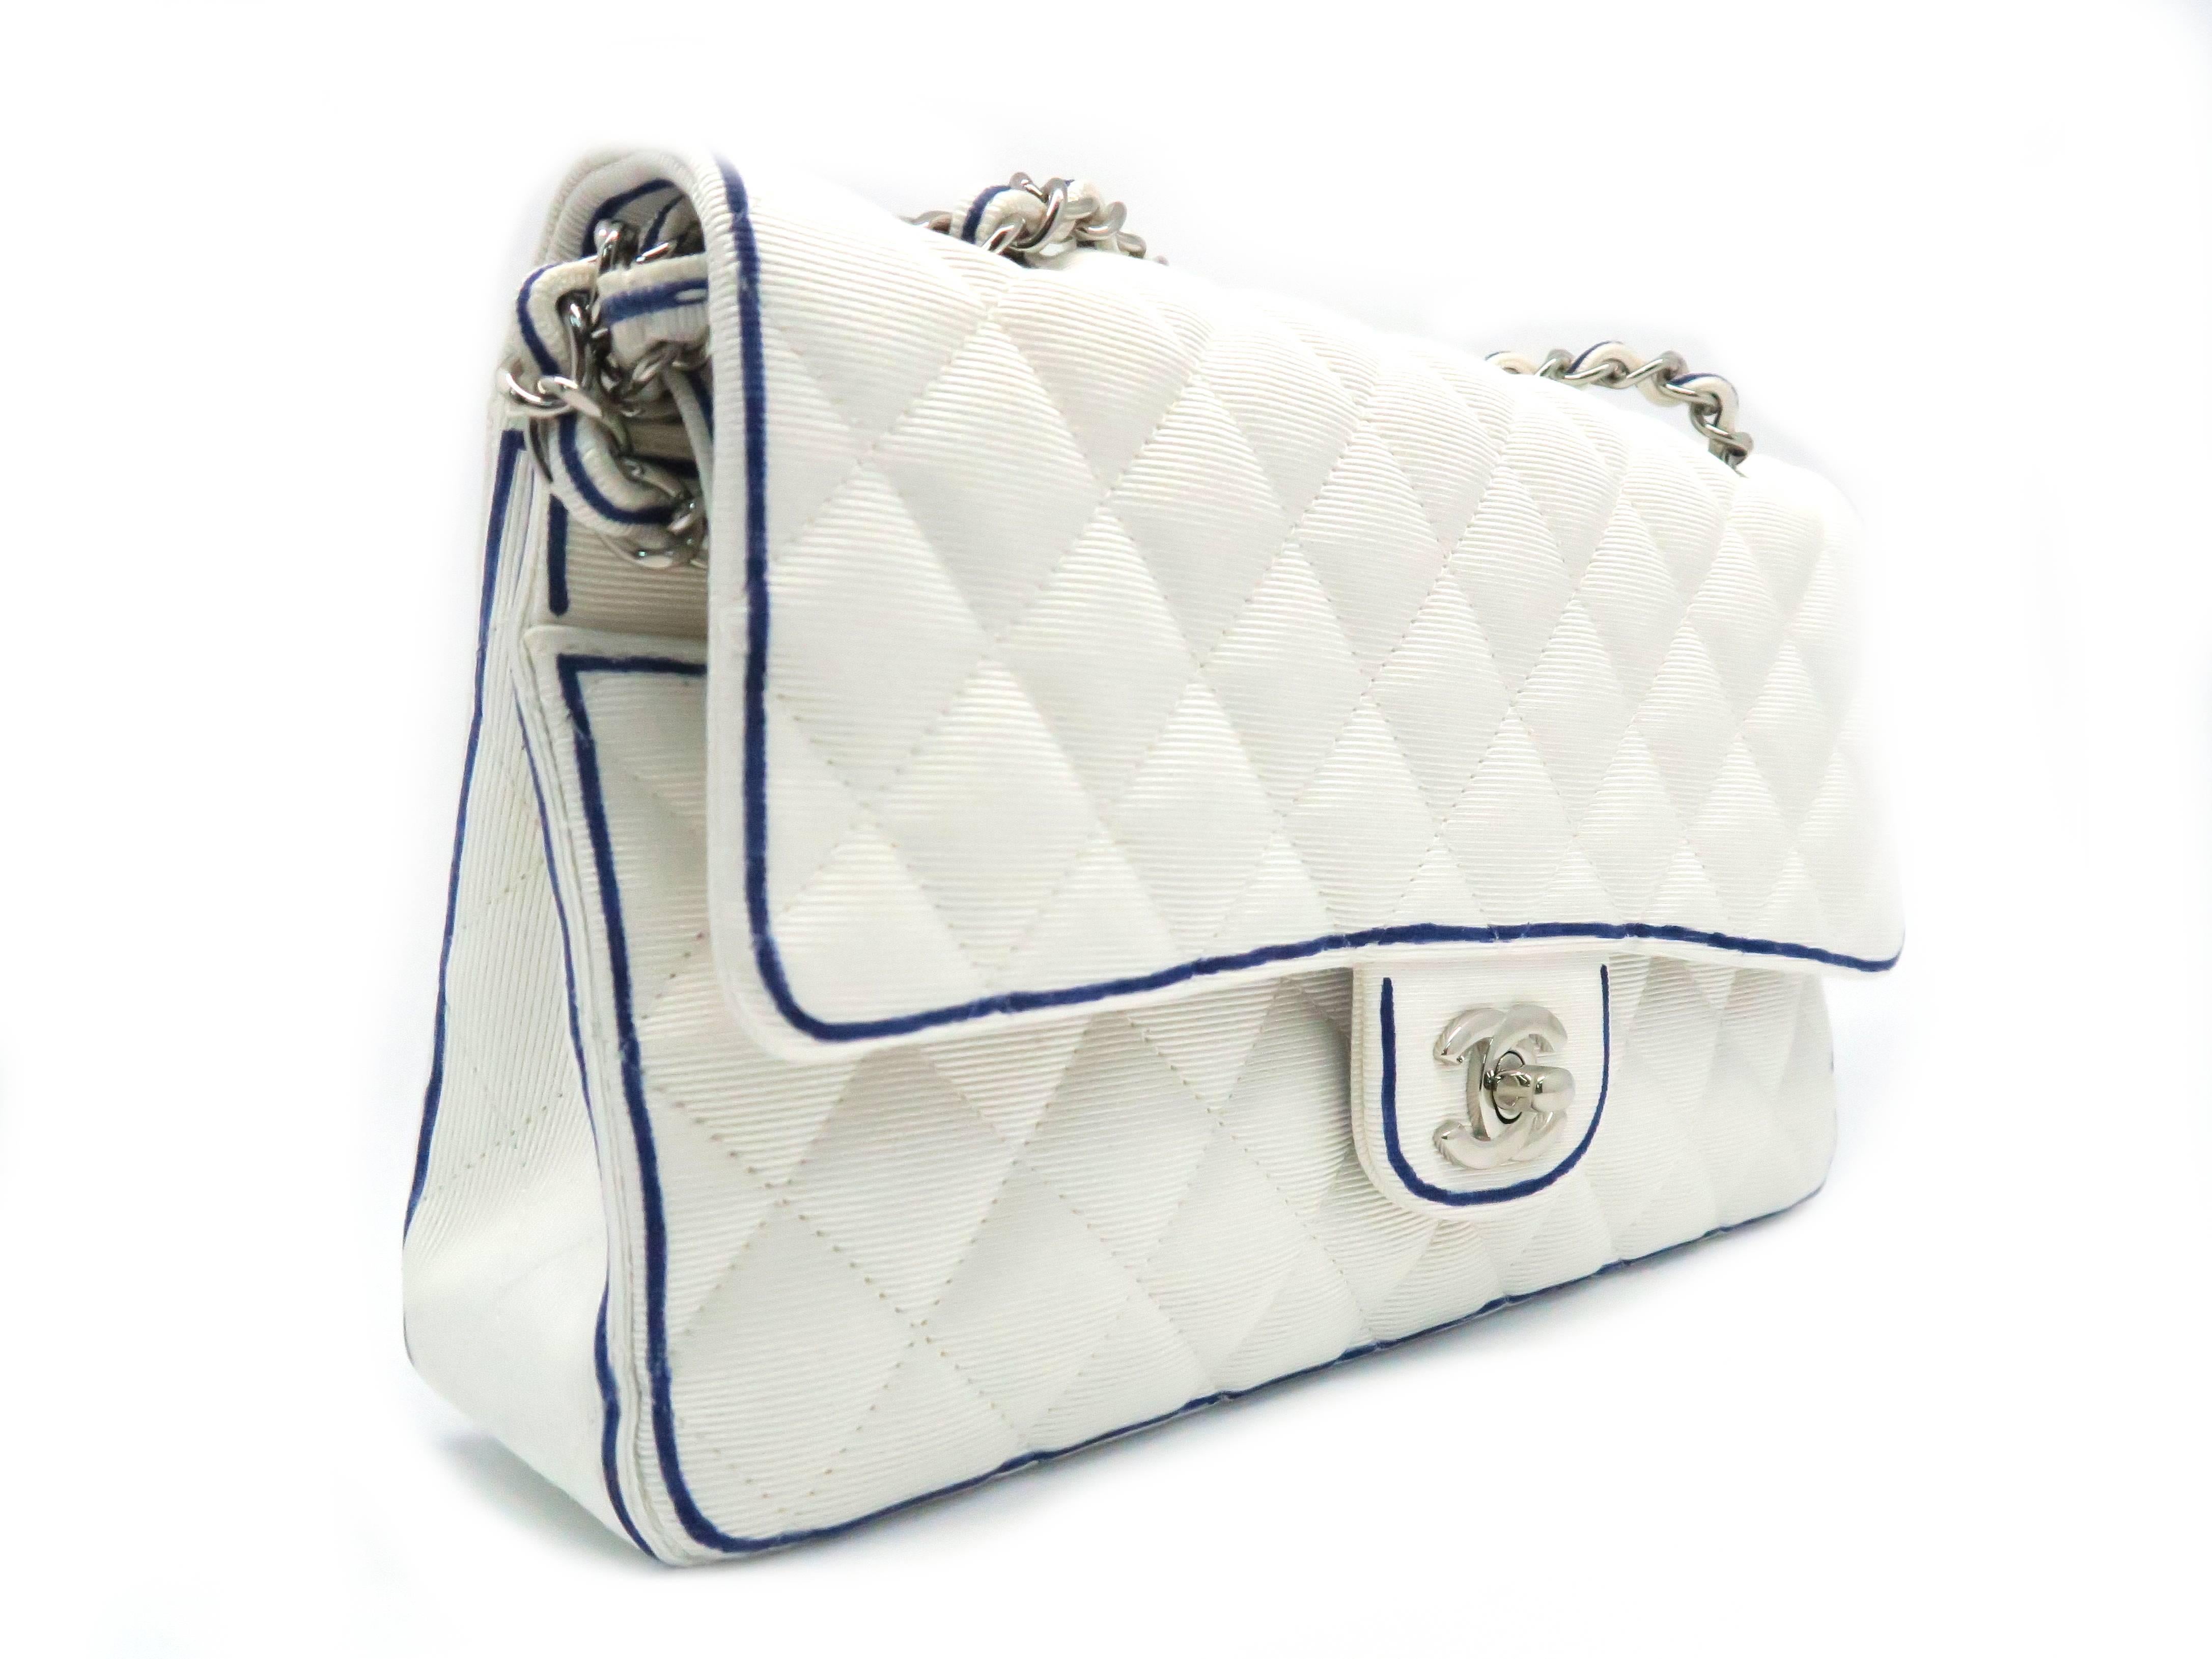 Color: White/ Blue

Material: Grosgrain

Condition: New
Overall: Brand New, not used
Surface: Good
Corners: Good
Edges: Good
Handles/Straps: Good
Hardware: Good

Dimension: W25 × H5 × D6.5cm（W9.8" × H1.9" × D2.5"）
Shoulder